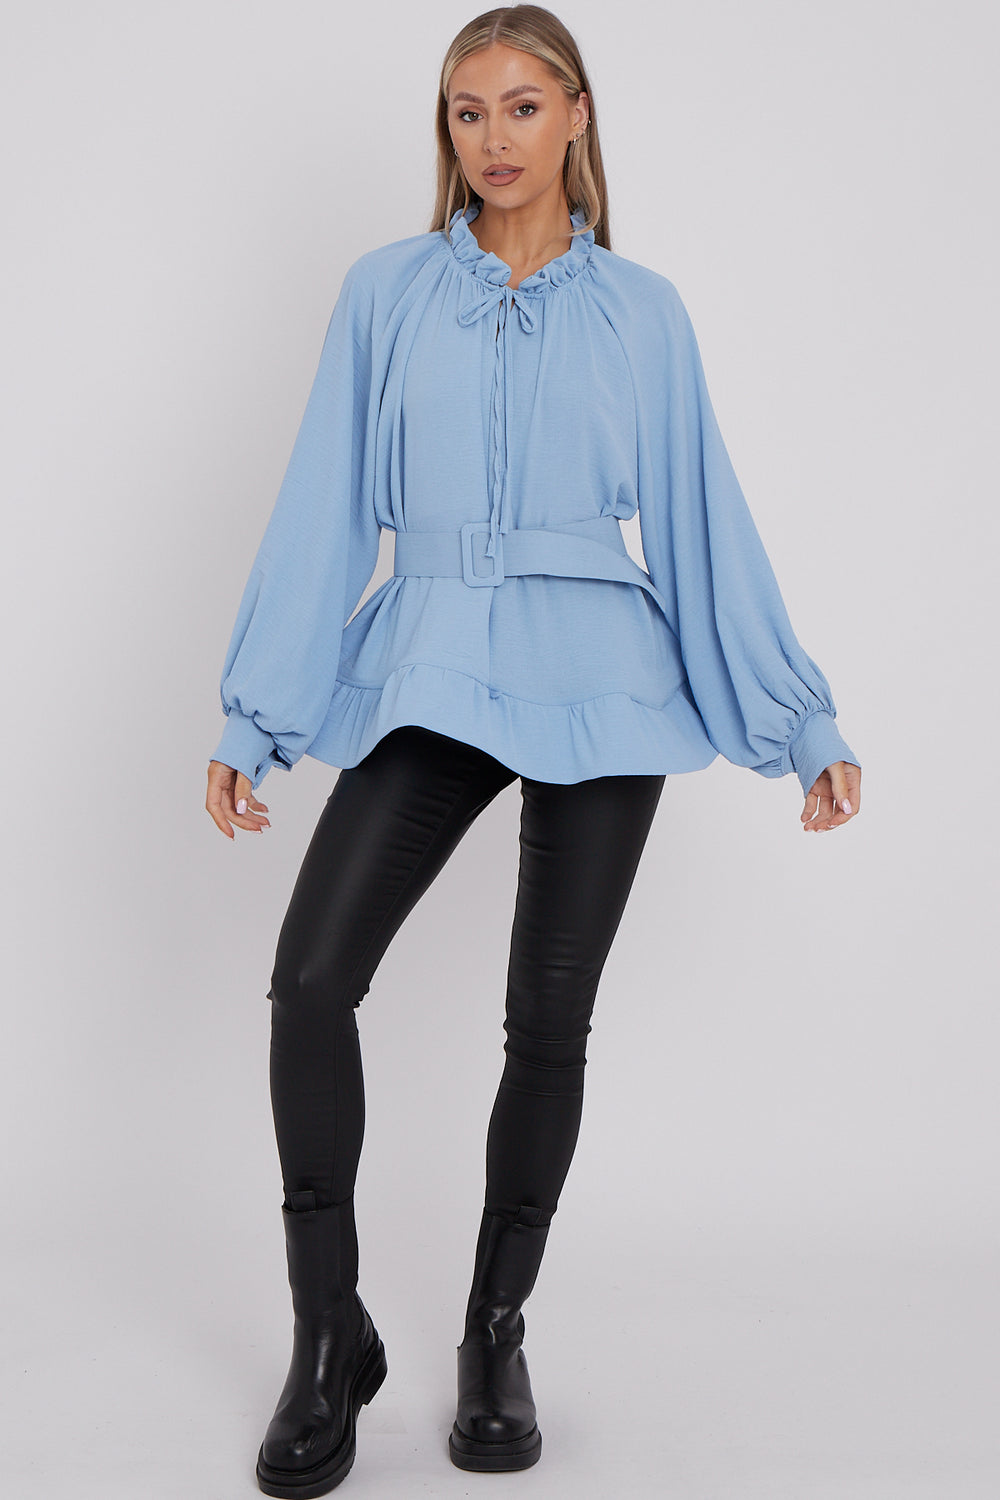 BELTED OVERSIZED TOP (8277303492856)